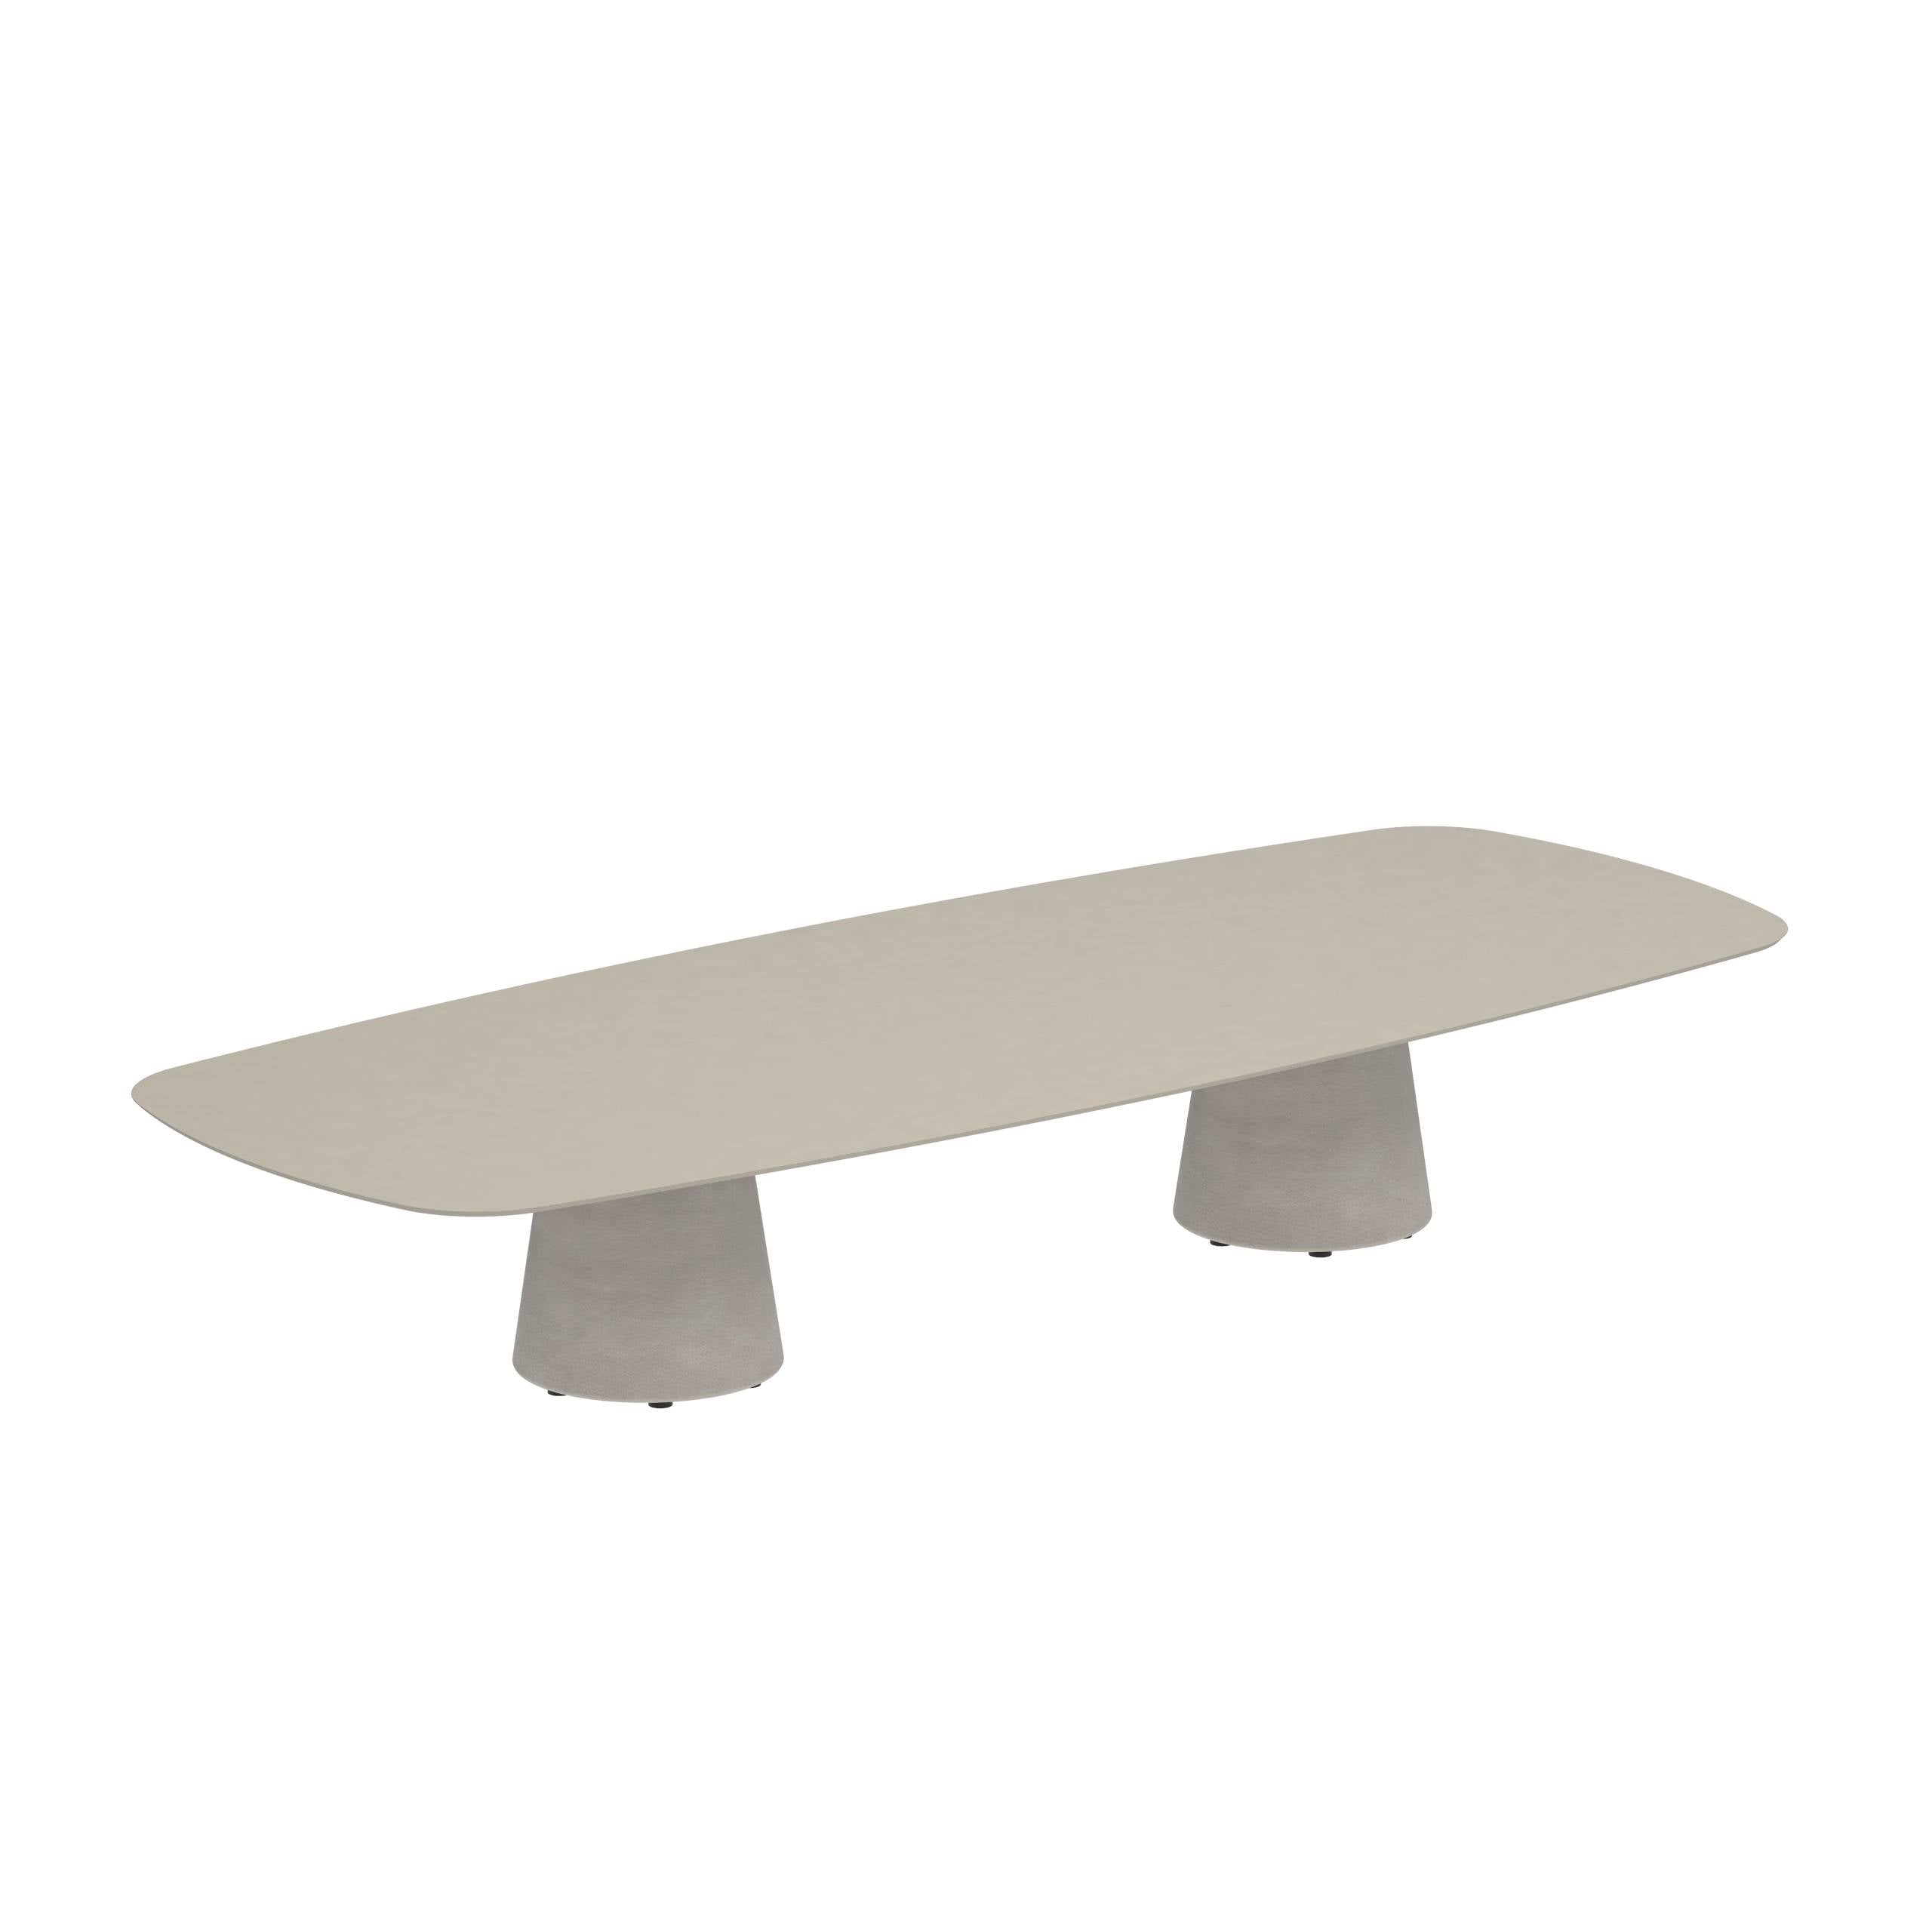 Conix Table 300x120 Cm High Lounge Legs Concrete Cement Grey - Table Top Ceramic Pearl Grey